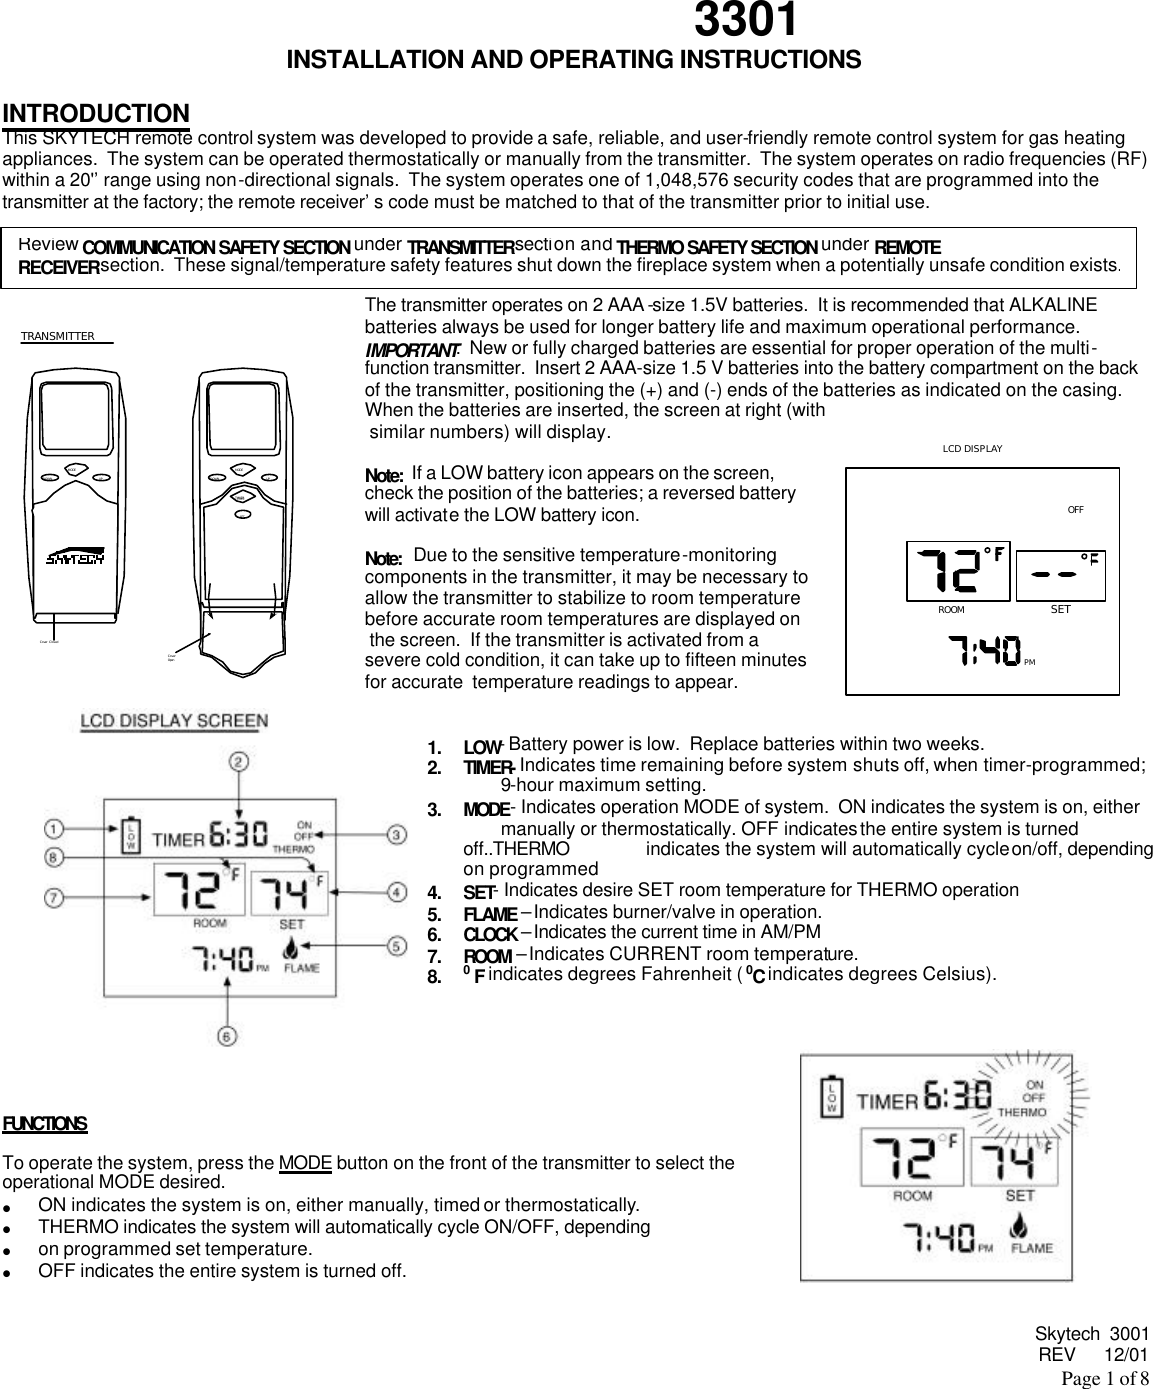  Skytech  3001 REV      12/01 Page 1 of 8   3301 INSTALLATION AND OPERATING INSTRUCTIONS  INTRODUCTION This SKYTECH remote control system was developed to provide a safe, reliable, and user-friendly remote control system for gas heating appliances.  The system can be operated thermostatically or manually from the transmitter.  The system operates on radio frequencies (RF) within a 20&apos;’range using non-directional signals.  The system operates one of 1,048,576 security codes that are programmed into the transmitter at the factory; the remote receiver’s code must be matched to that of the transmitter prior to initial use.      The transmitter operates on 2 AAA -size 1.5V batteries.  It is recommended that ALKALINE batteries always be used for longer battery life and maximum operational performance.  IMPORTANT:  New or fully charged batteries are essential for proper operation of the multi-function transmitter.  Insert 2 AAA-size 1.5 V batteries into the battery compartment on the back of the transmitter, positioning the (+) and (-) ends of the batteries as indicated on the casing.  When the batteries are inserted, the screen at right (with  similar numbers) will display.                              Note:  If a LOW battery icon appears on the screen,   check the position of the batteries; a reversed battery  will activate the LOW battery icon.  Note:   Due to the sensitive temperature-monitoring  components in the transmitter, it may be necessary to  allow the transmitter to stabilize to room temperature  before accurate room temperatures are displayed on  the screen.  If the transmitter is activated from a  severe cold condition, it can take up to fifteen minutes  for accurate  temperature readings to appear.     1. LOW- Battery power is low.  Replace batteries within two weeks. 2. TIMER- Indicates time remaining before system shuts off, when timer-programmed;  9-hour maximum setting.  3. MODE- Indicates operation MODE of system.  ON indicates the system is on, either  manually or thermostatically. OFF indicates the entire system is turned off..THERMO  indicates the system will automatically cycle on/off, depending on programmed  4. SET- Indicates desire SET room temperature for THERMO operation 5. FLAME – Indicates burner/valve in operation. 6. CLOCK – Indicates the current time in AM/PM 7. ROOM – Indicates CURRENT room temperature. 8. 0 F indicates degrees Fahrenheit ( 0C indicates degrees Celsius).       FUNCTIONS   To operate the system, press the MODE button on the front of the transmitter to select the  operational MODE desired. • ON indicates the system is on, either manually, timed or thermostatically. • THERMO indicates the system will automatically cycle ON/OFF, depending  • on programmed set temperature. • OFF indicates the entire system is turned off.   Review COMMUNICATION SAFETY SECTION under TRANSMITTER section and THERMO SAFETY SECTION under REMOTE RECEIVER section.  These signal/temperature safety features shut down the fireplace system when a potentially unsafe condition exists.TRANSMITTERCover ClosedUPDOWNMODEUPDOWNMODETIMER TIMESETCoverOpen ROOMOFFSETPMLCD DISPLAY 